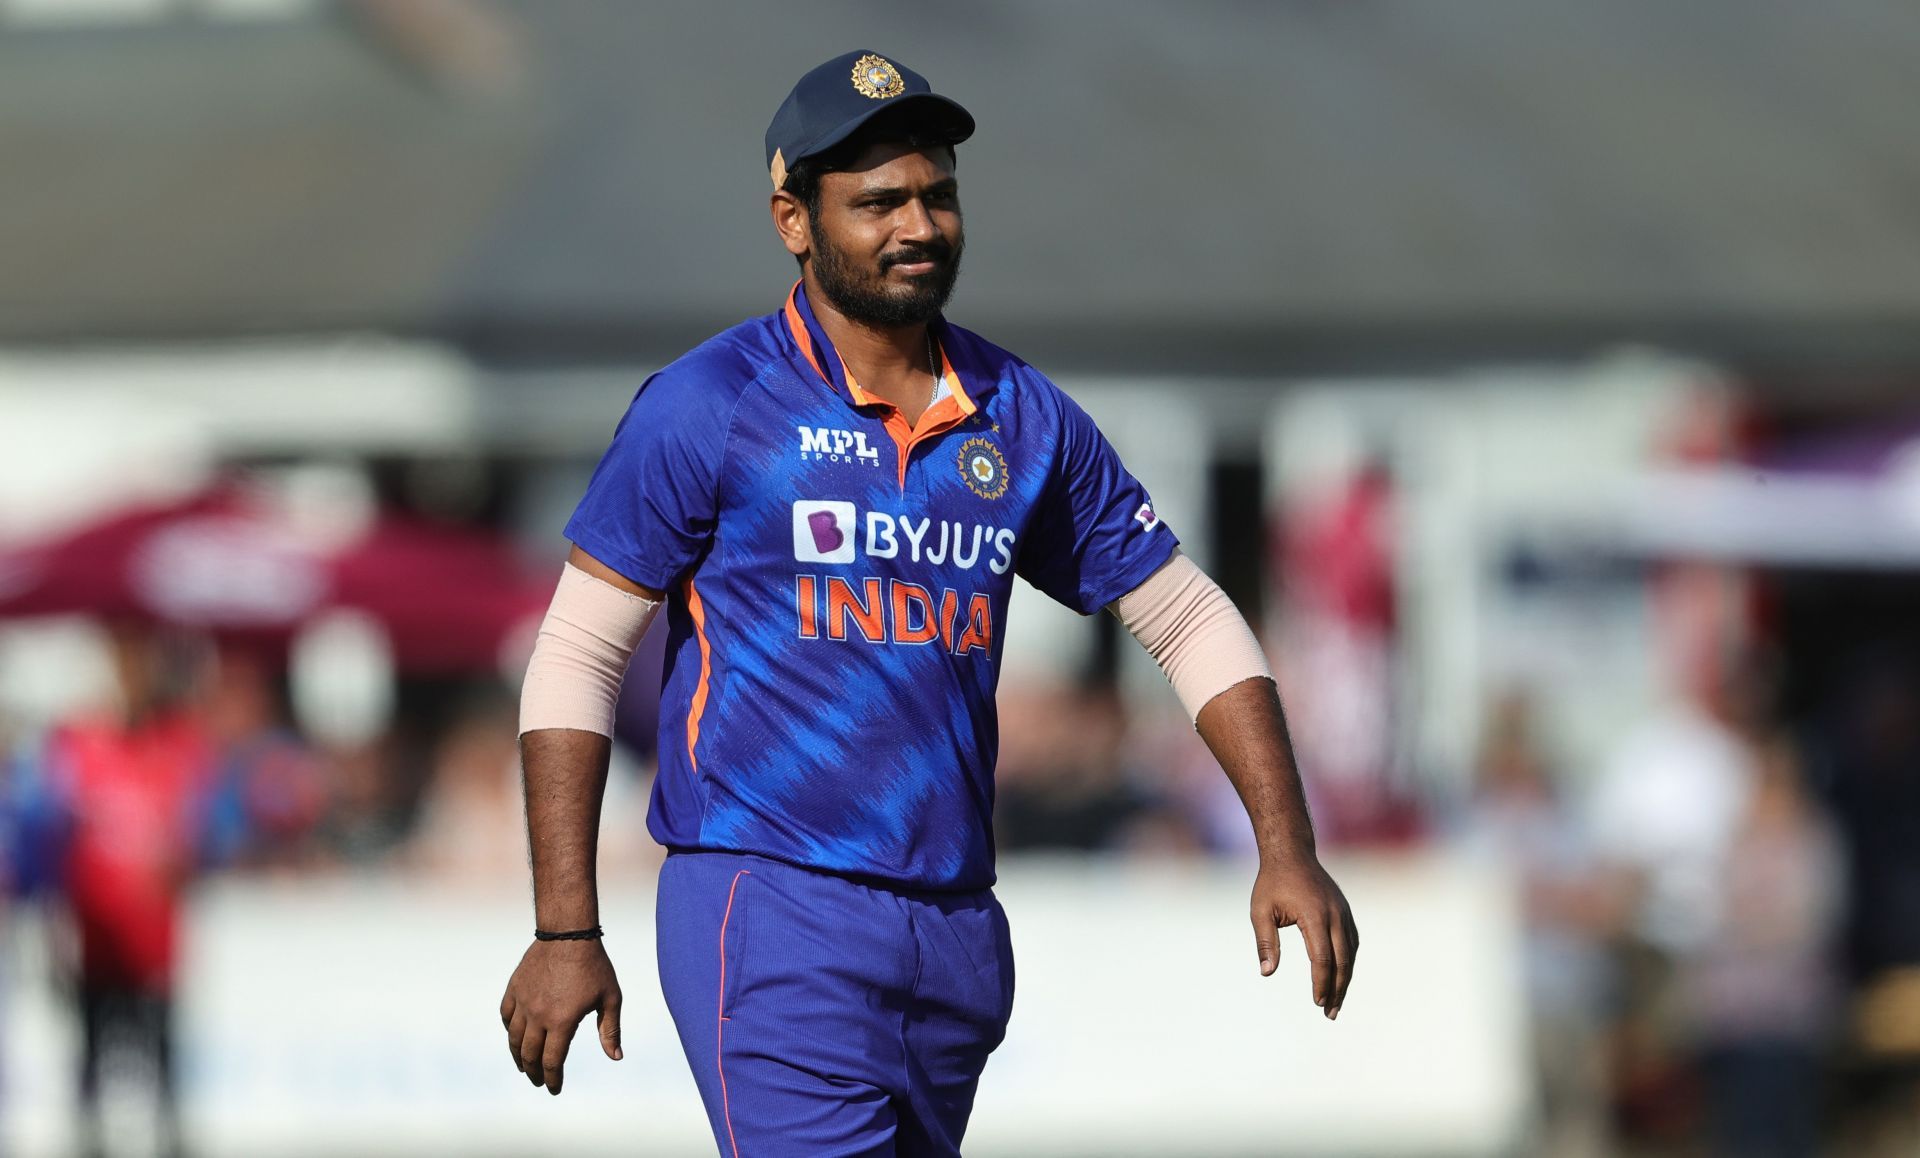 Sanju Samson is part of the C catergory in the contract list of the BCCI